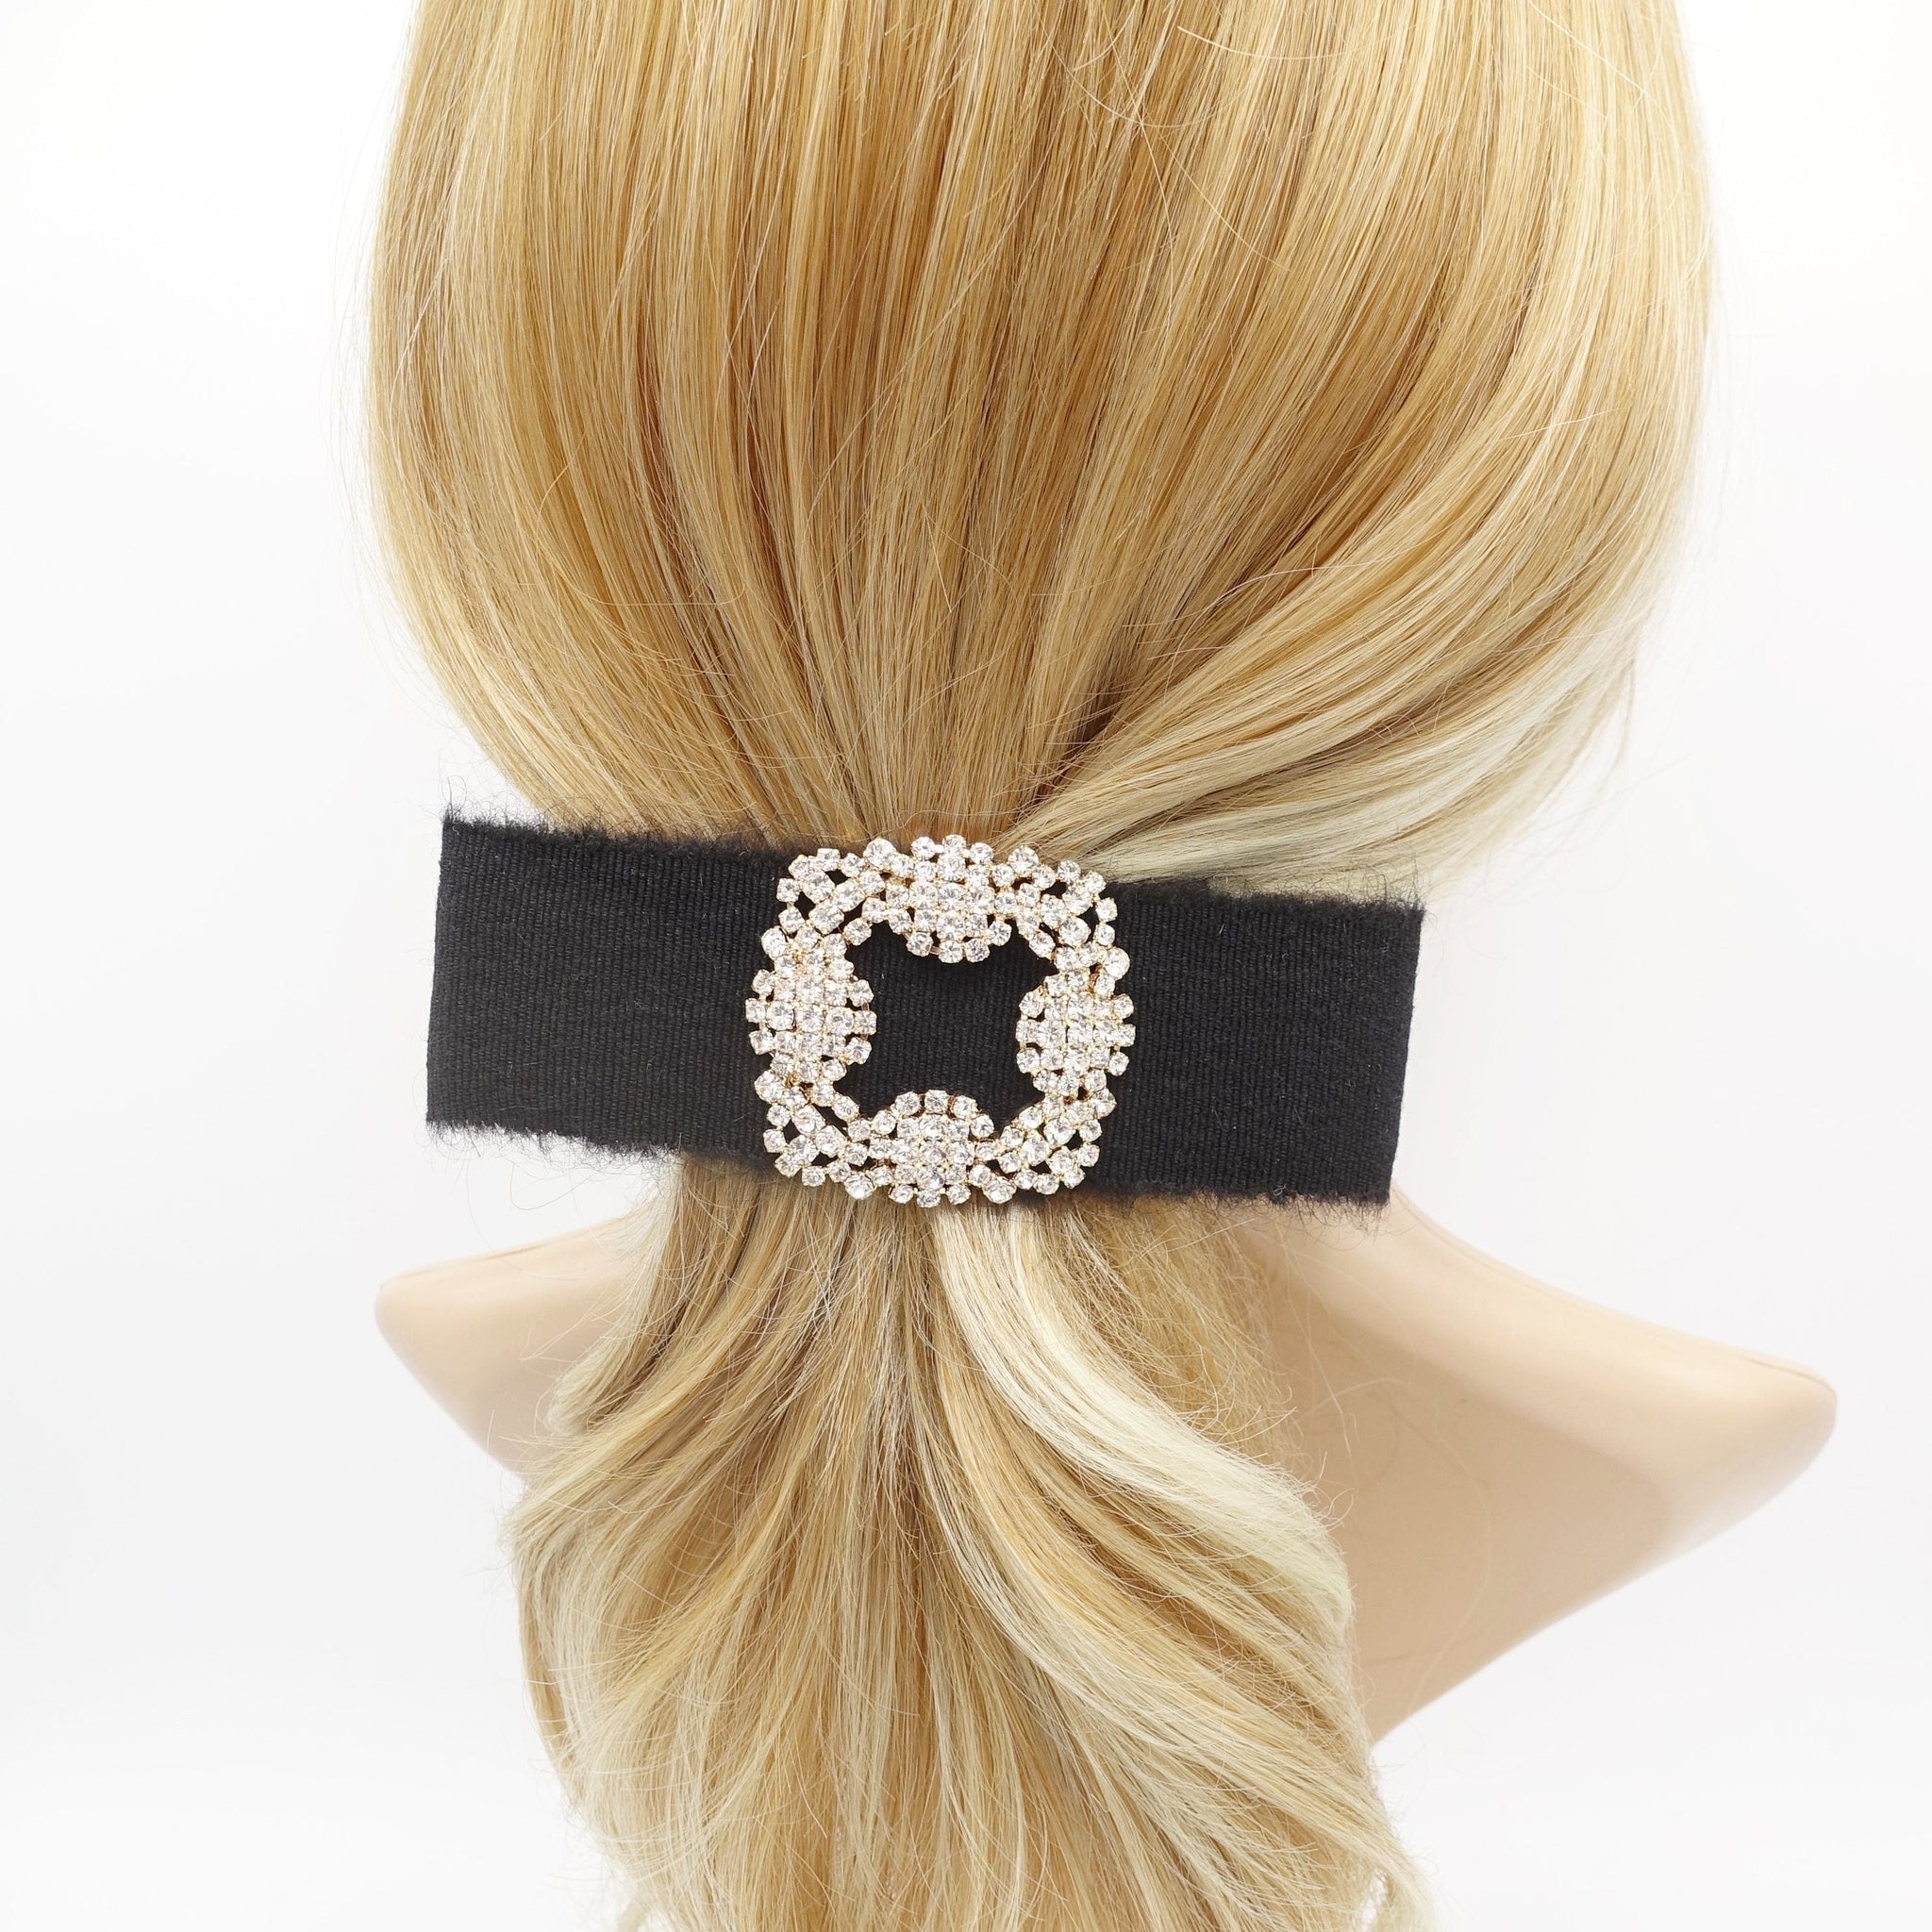 veryshine.com Barrette (Bow) Black classical fabric hair bow bling buckle frayed trim hair accessory for women